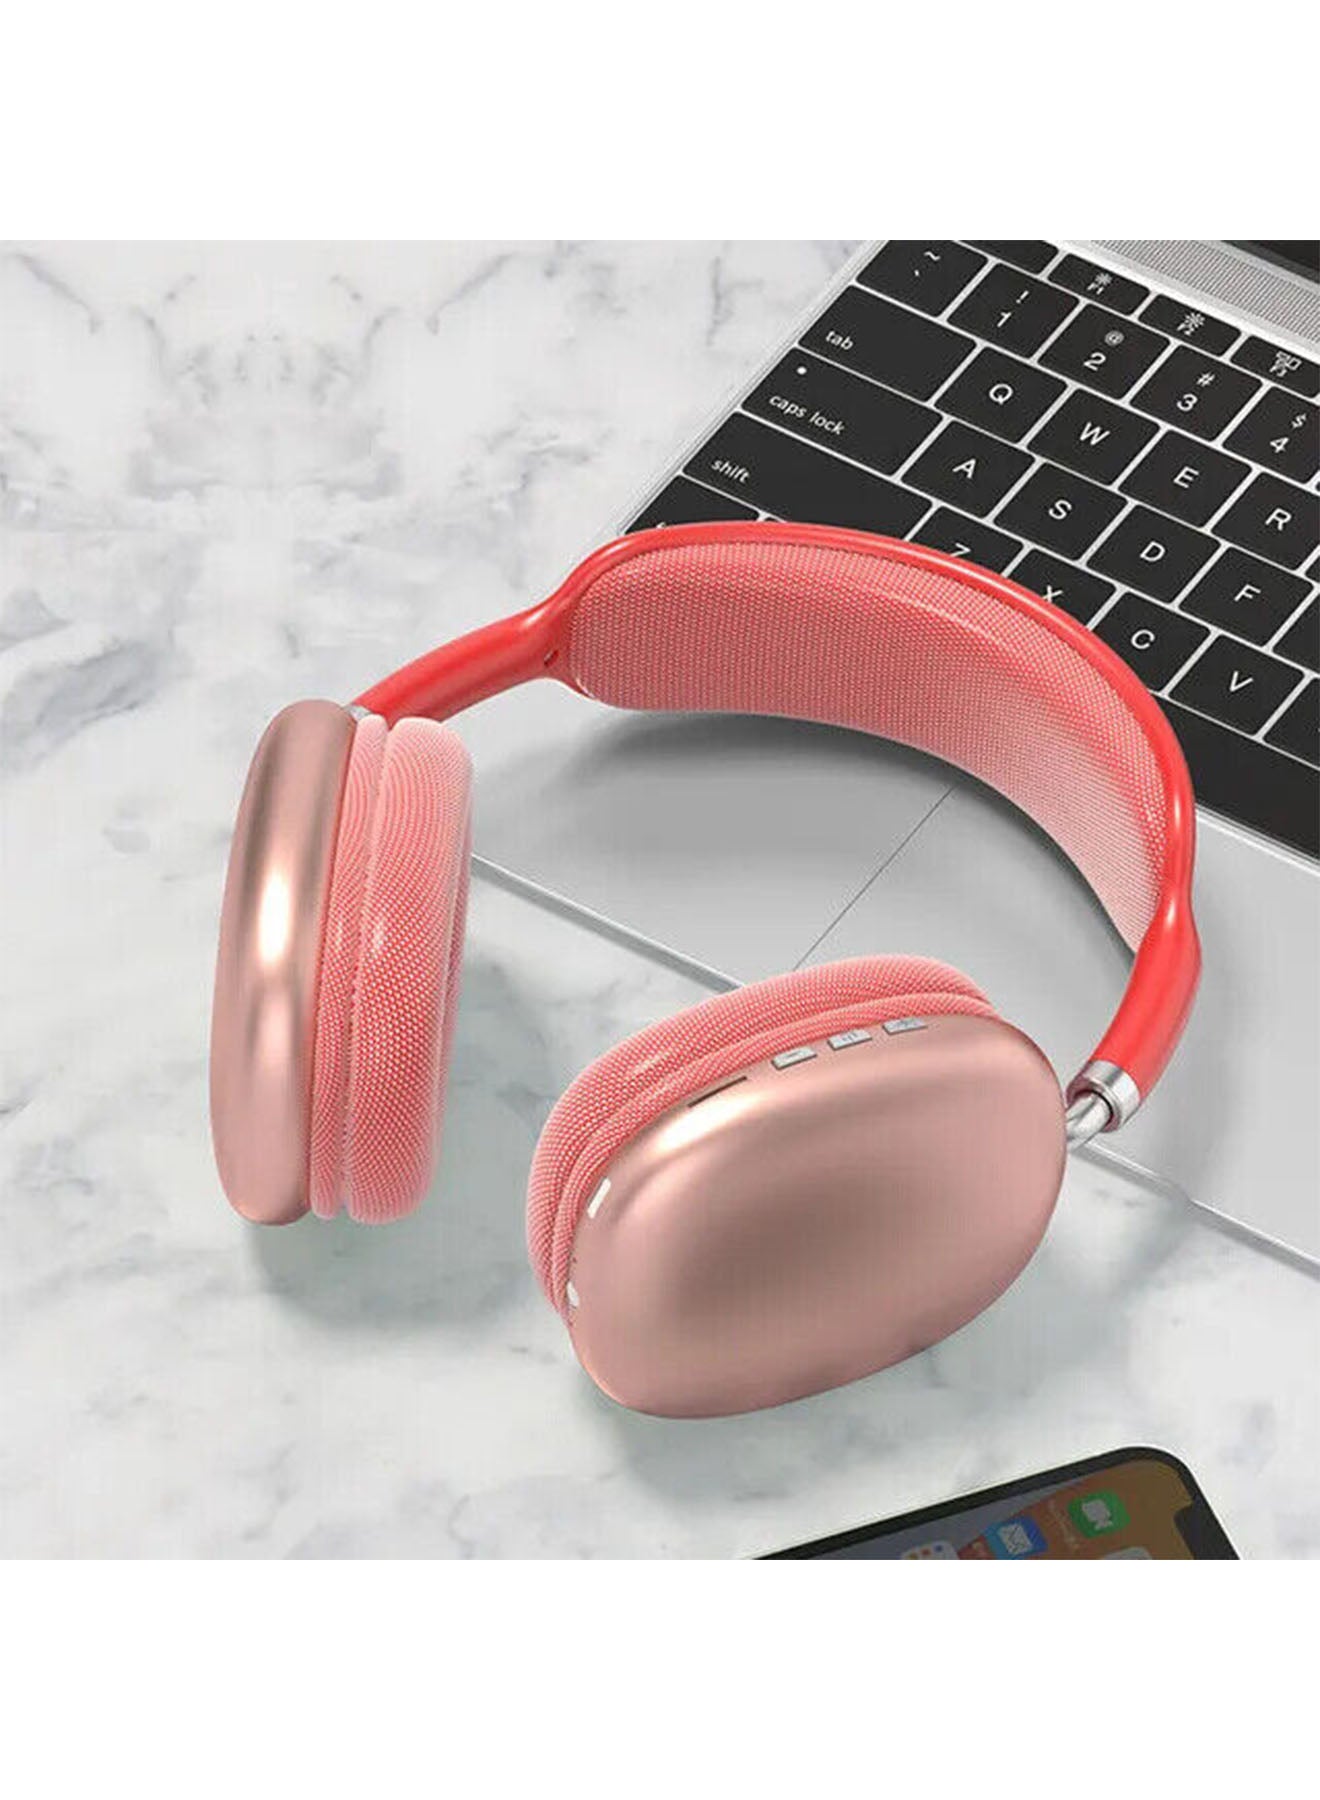 DANIM P9 Wireless Bluetooth Headphones Noise Cancelling Stereo Sound Gaming Over ear compitable with all blutooth devices